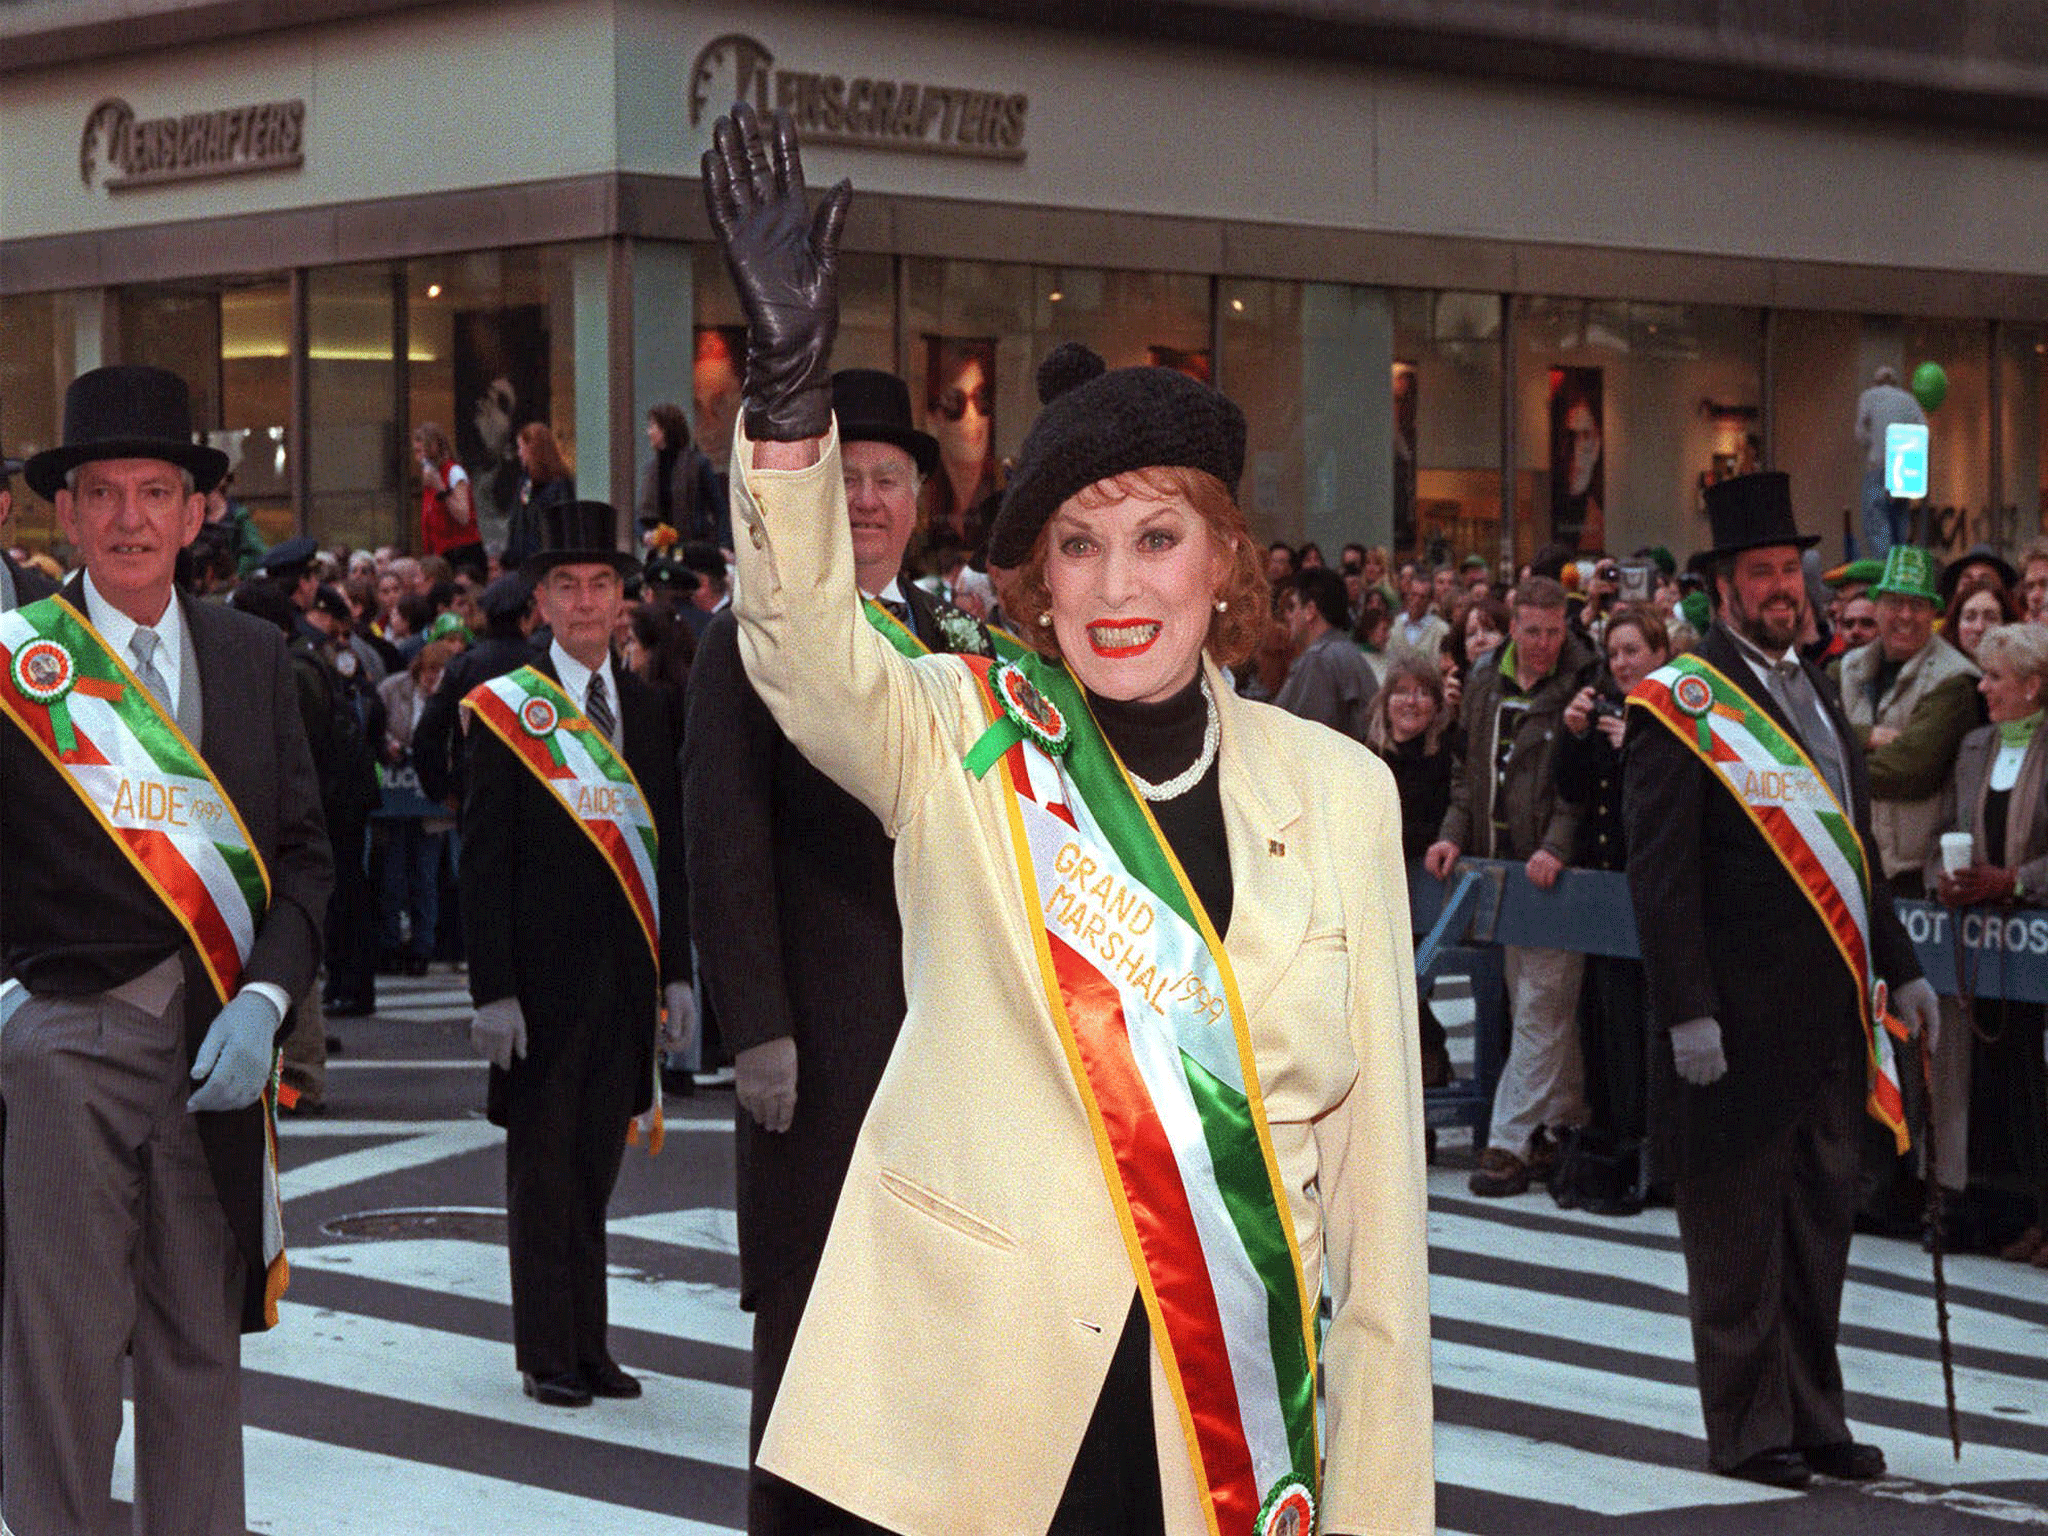 Ms O'Hara, who was born in Dublin, was a proud Irishwoman according to her family